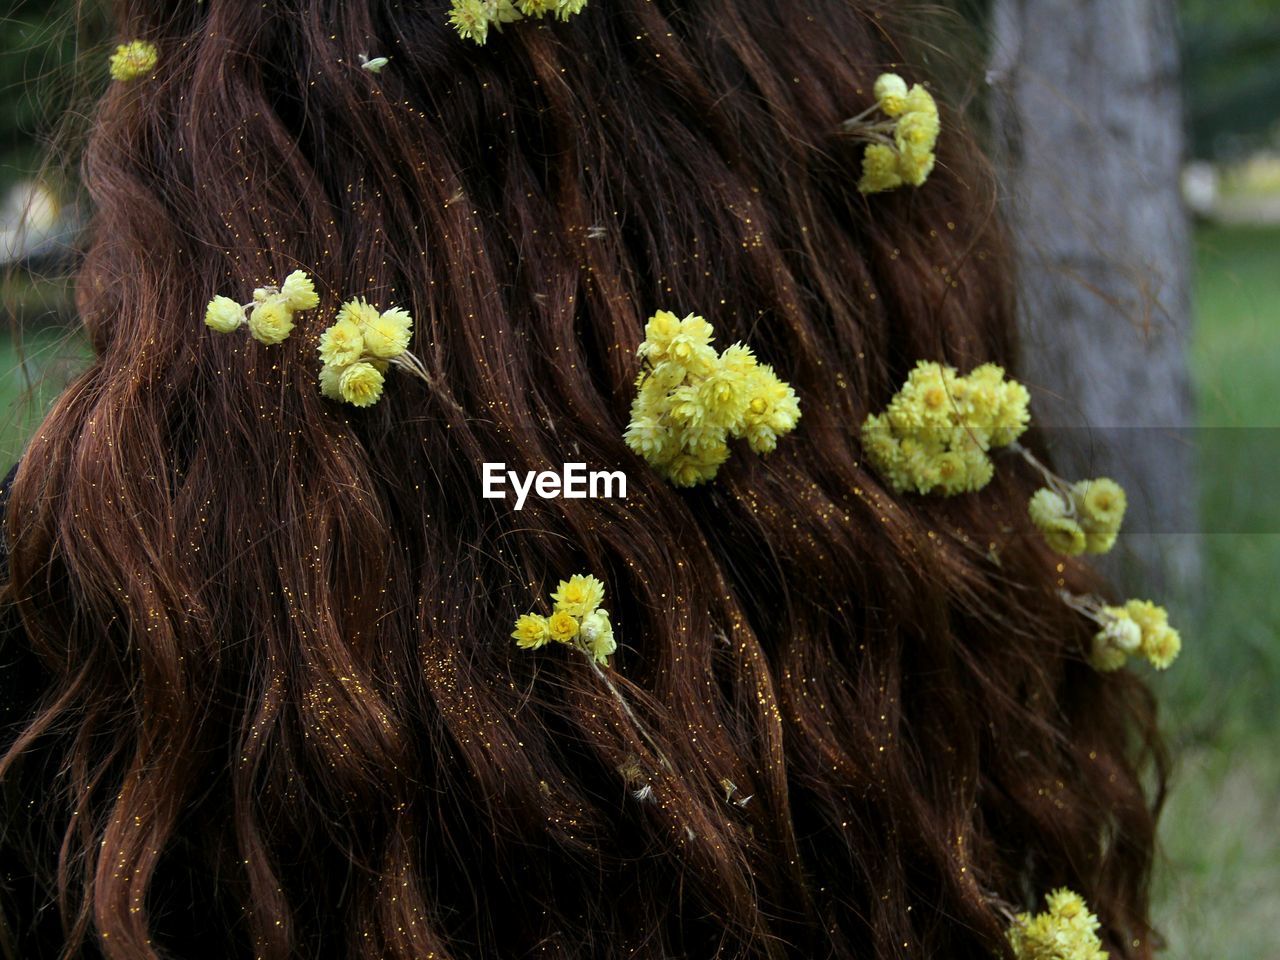 Close-up of yellow flowers and glitter in brown hair